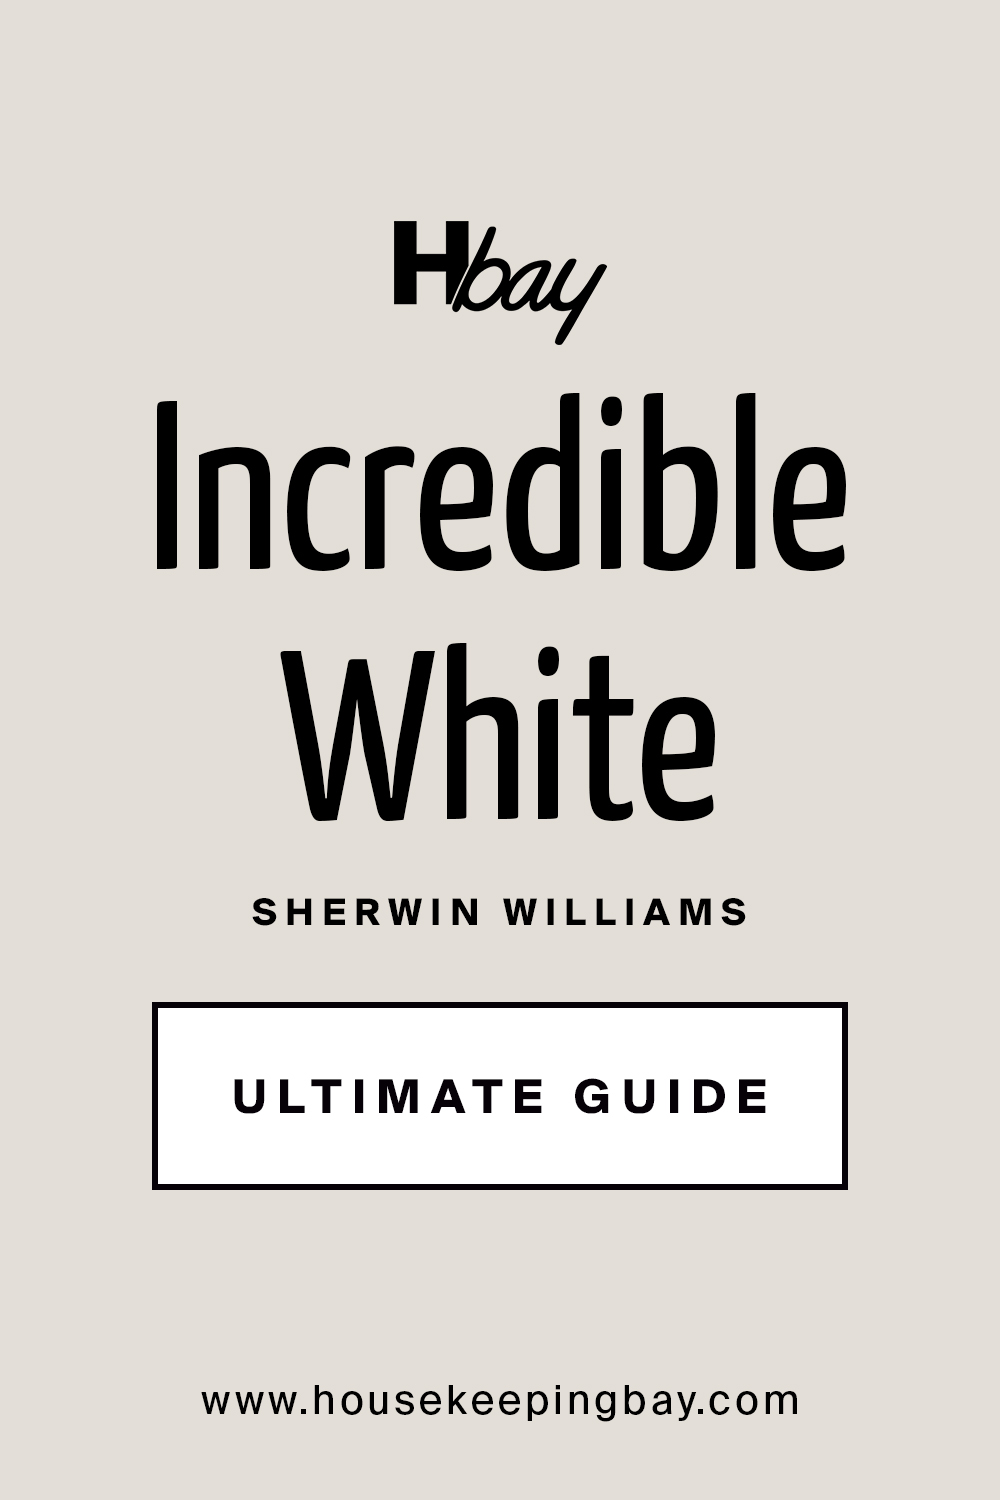 Incredible White by Sherwin Williams Ultimate Guide